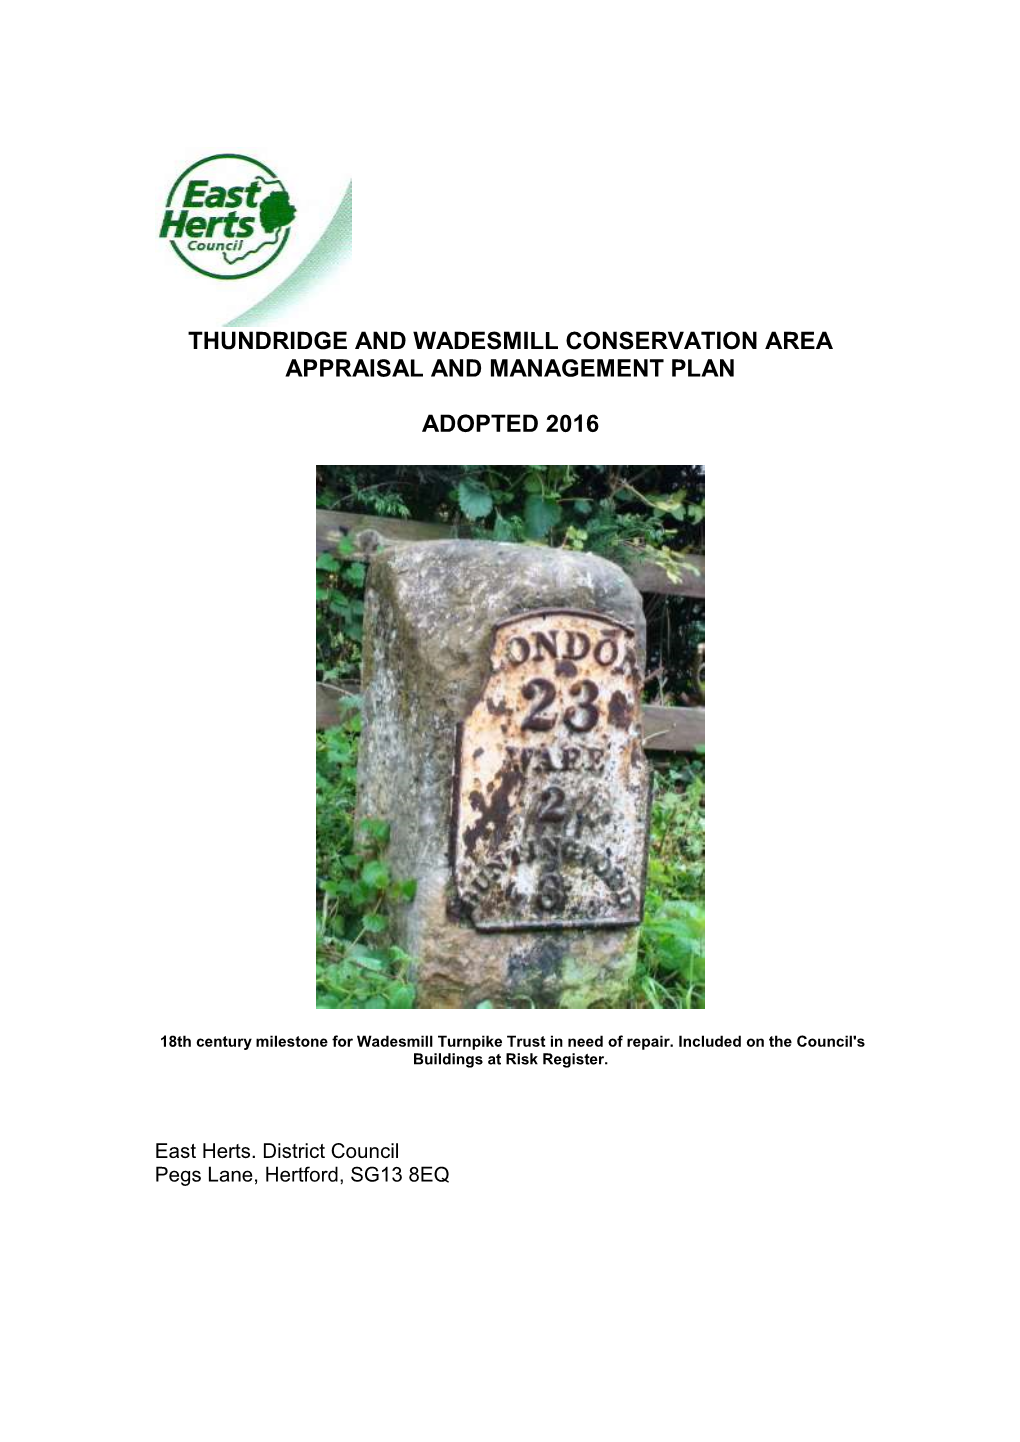 Thundridge and Wadesmill Conservation Area Appraisal and Management Plan